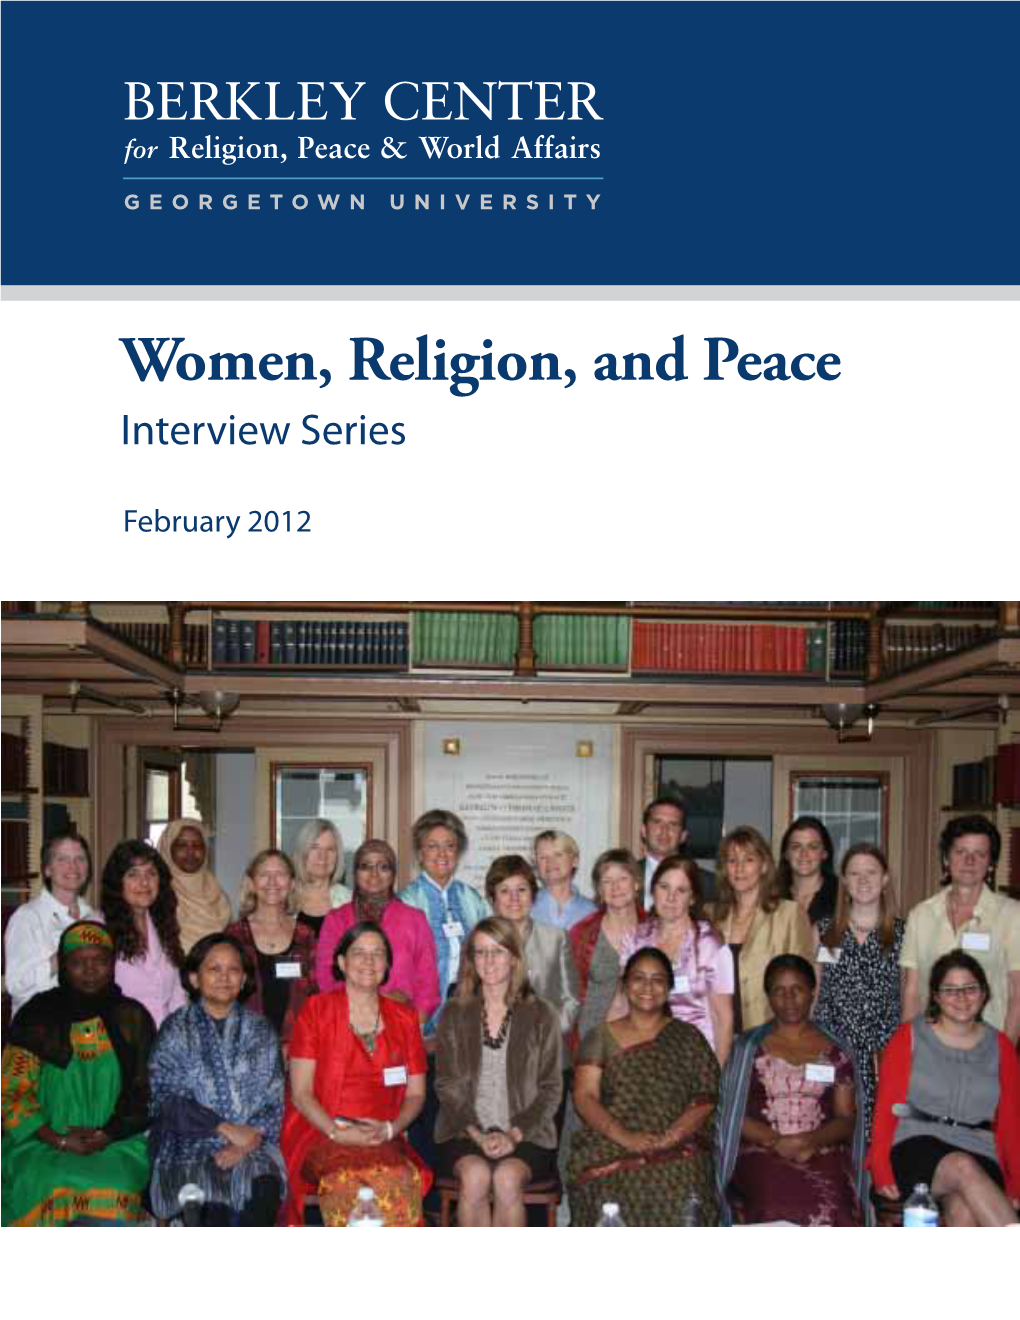 Women, Religion, and Peace Interview Series